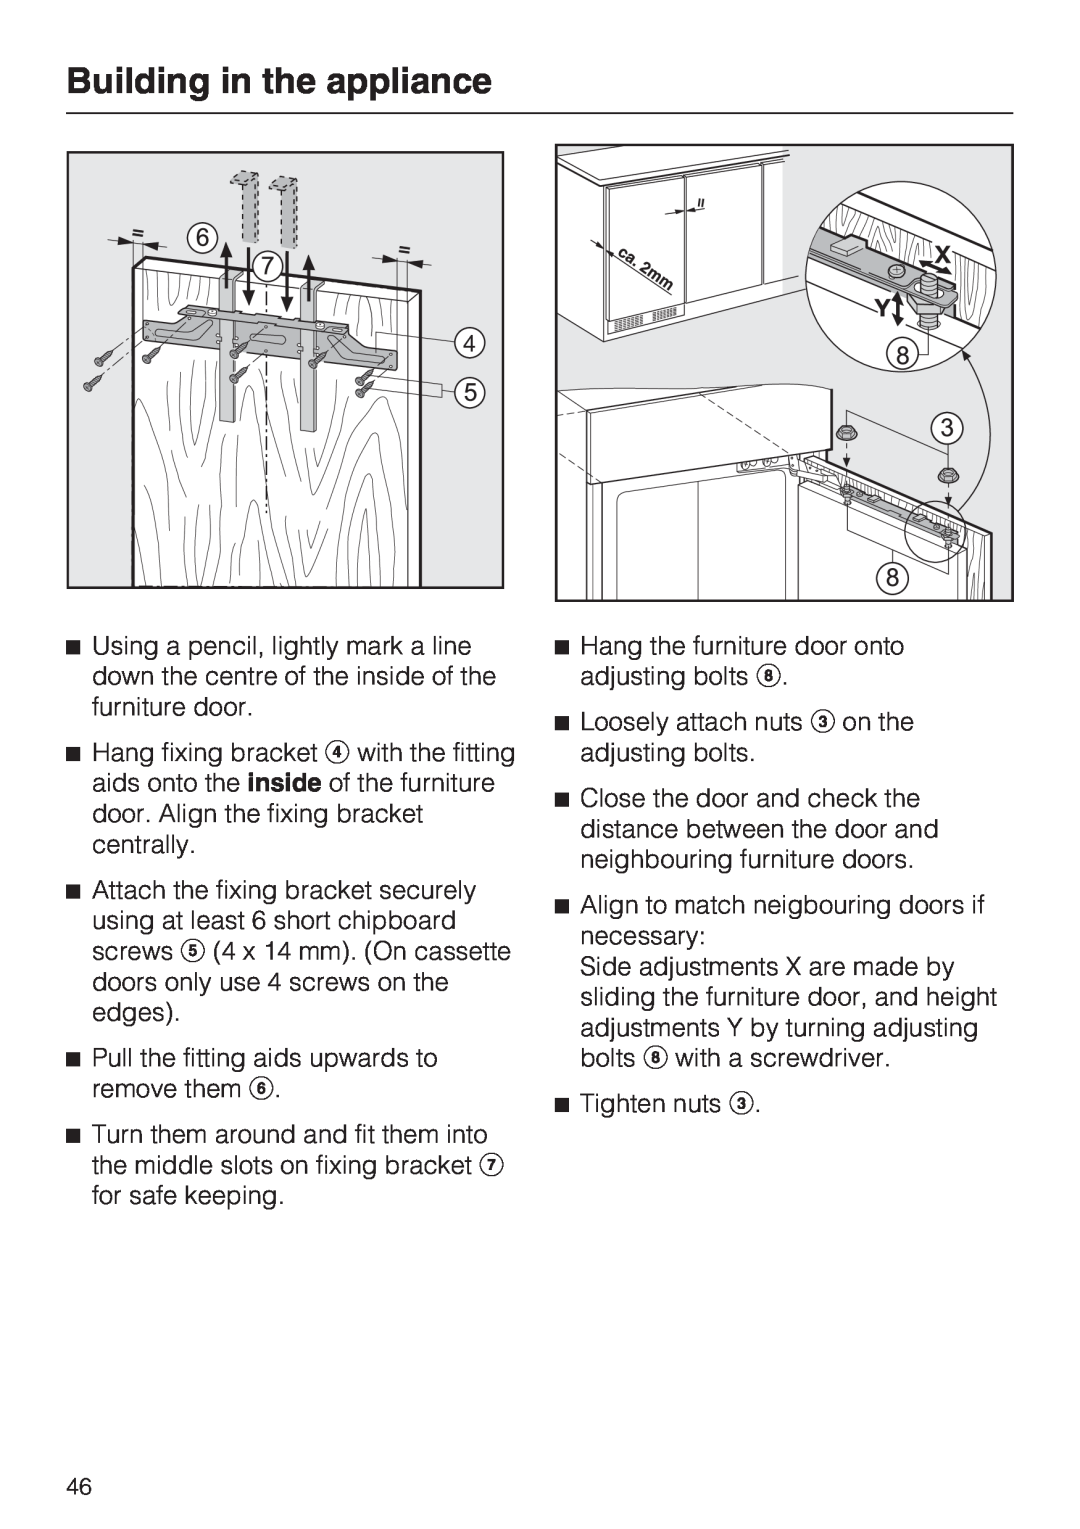 Miele K9752, K9552 installation instructions Building in the appliance, Pull the fitting aids upwards to remove them f 